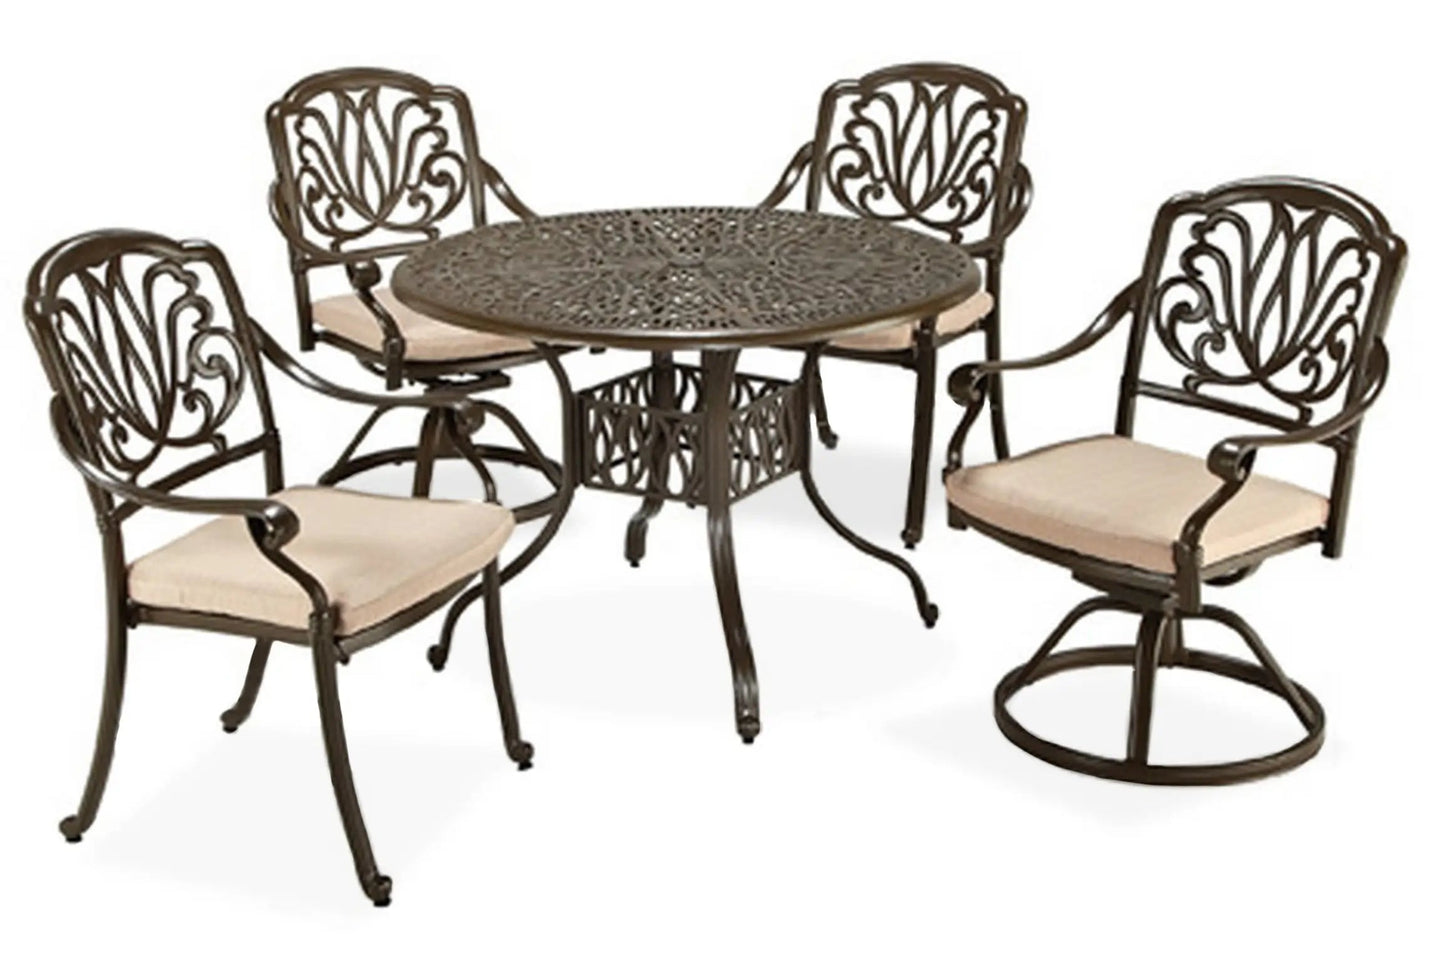 Homestyles Capri Taupe 5 Piece Outdoor Dining Set